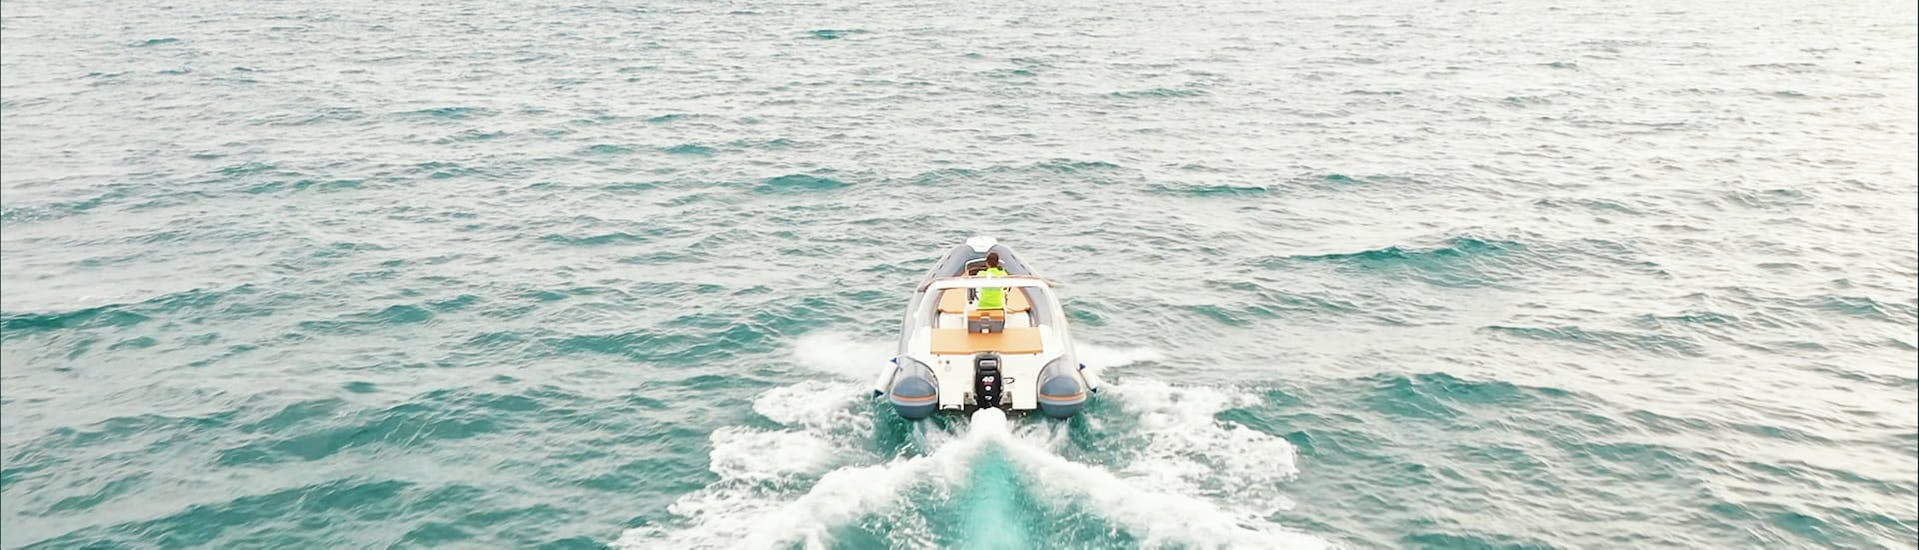 Picture of a RIB boat from the RIB boat rental service from Sea Star Marsala in the sea.